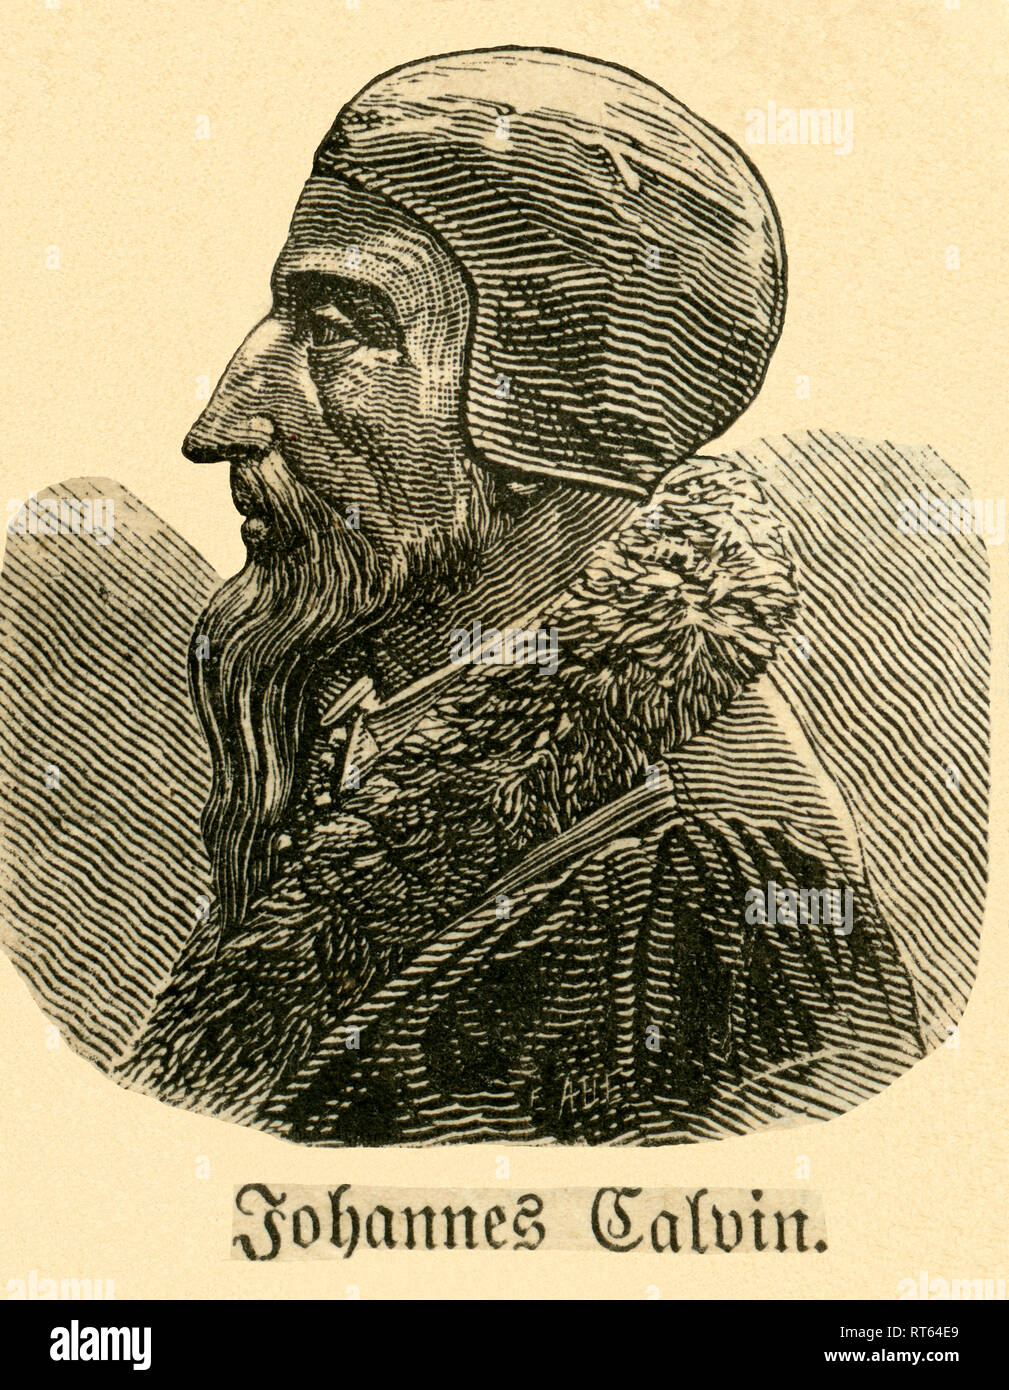 John Calvin, French theologian, pastor and reformer, illustration from: 'Die Welt in Bildern ' (images of the world), published by Dr. Chr. G. Hottinger in self-publishing, Berlin, Strasbourg, 1881., Additional-Rights-Clearance-Info-Not-Available Stock Photo